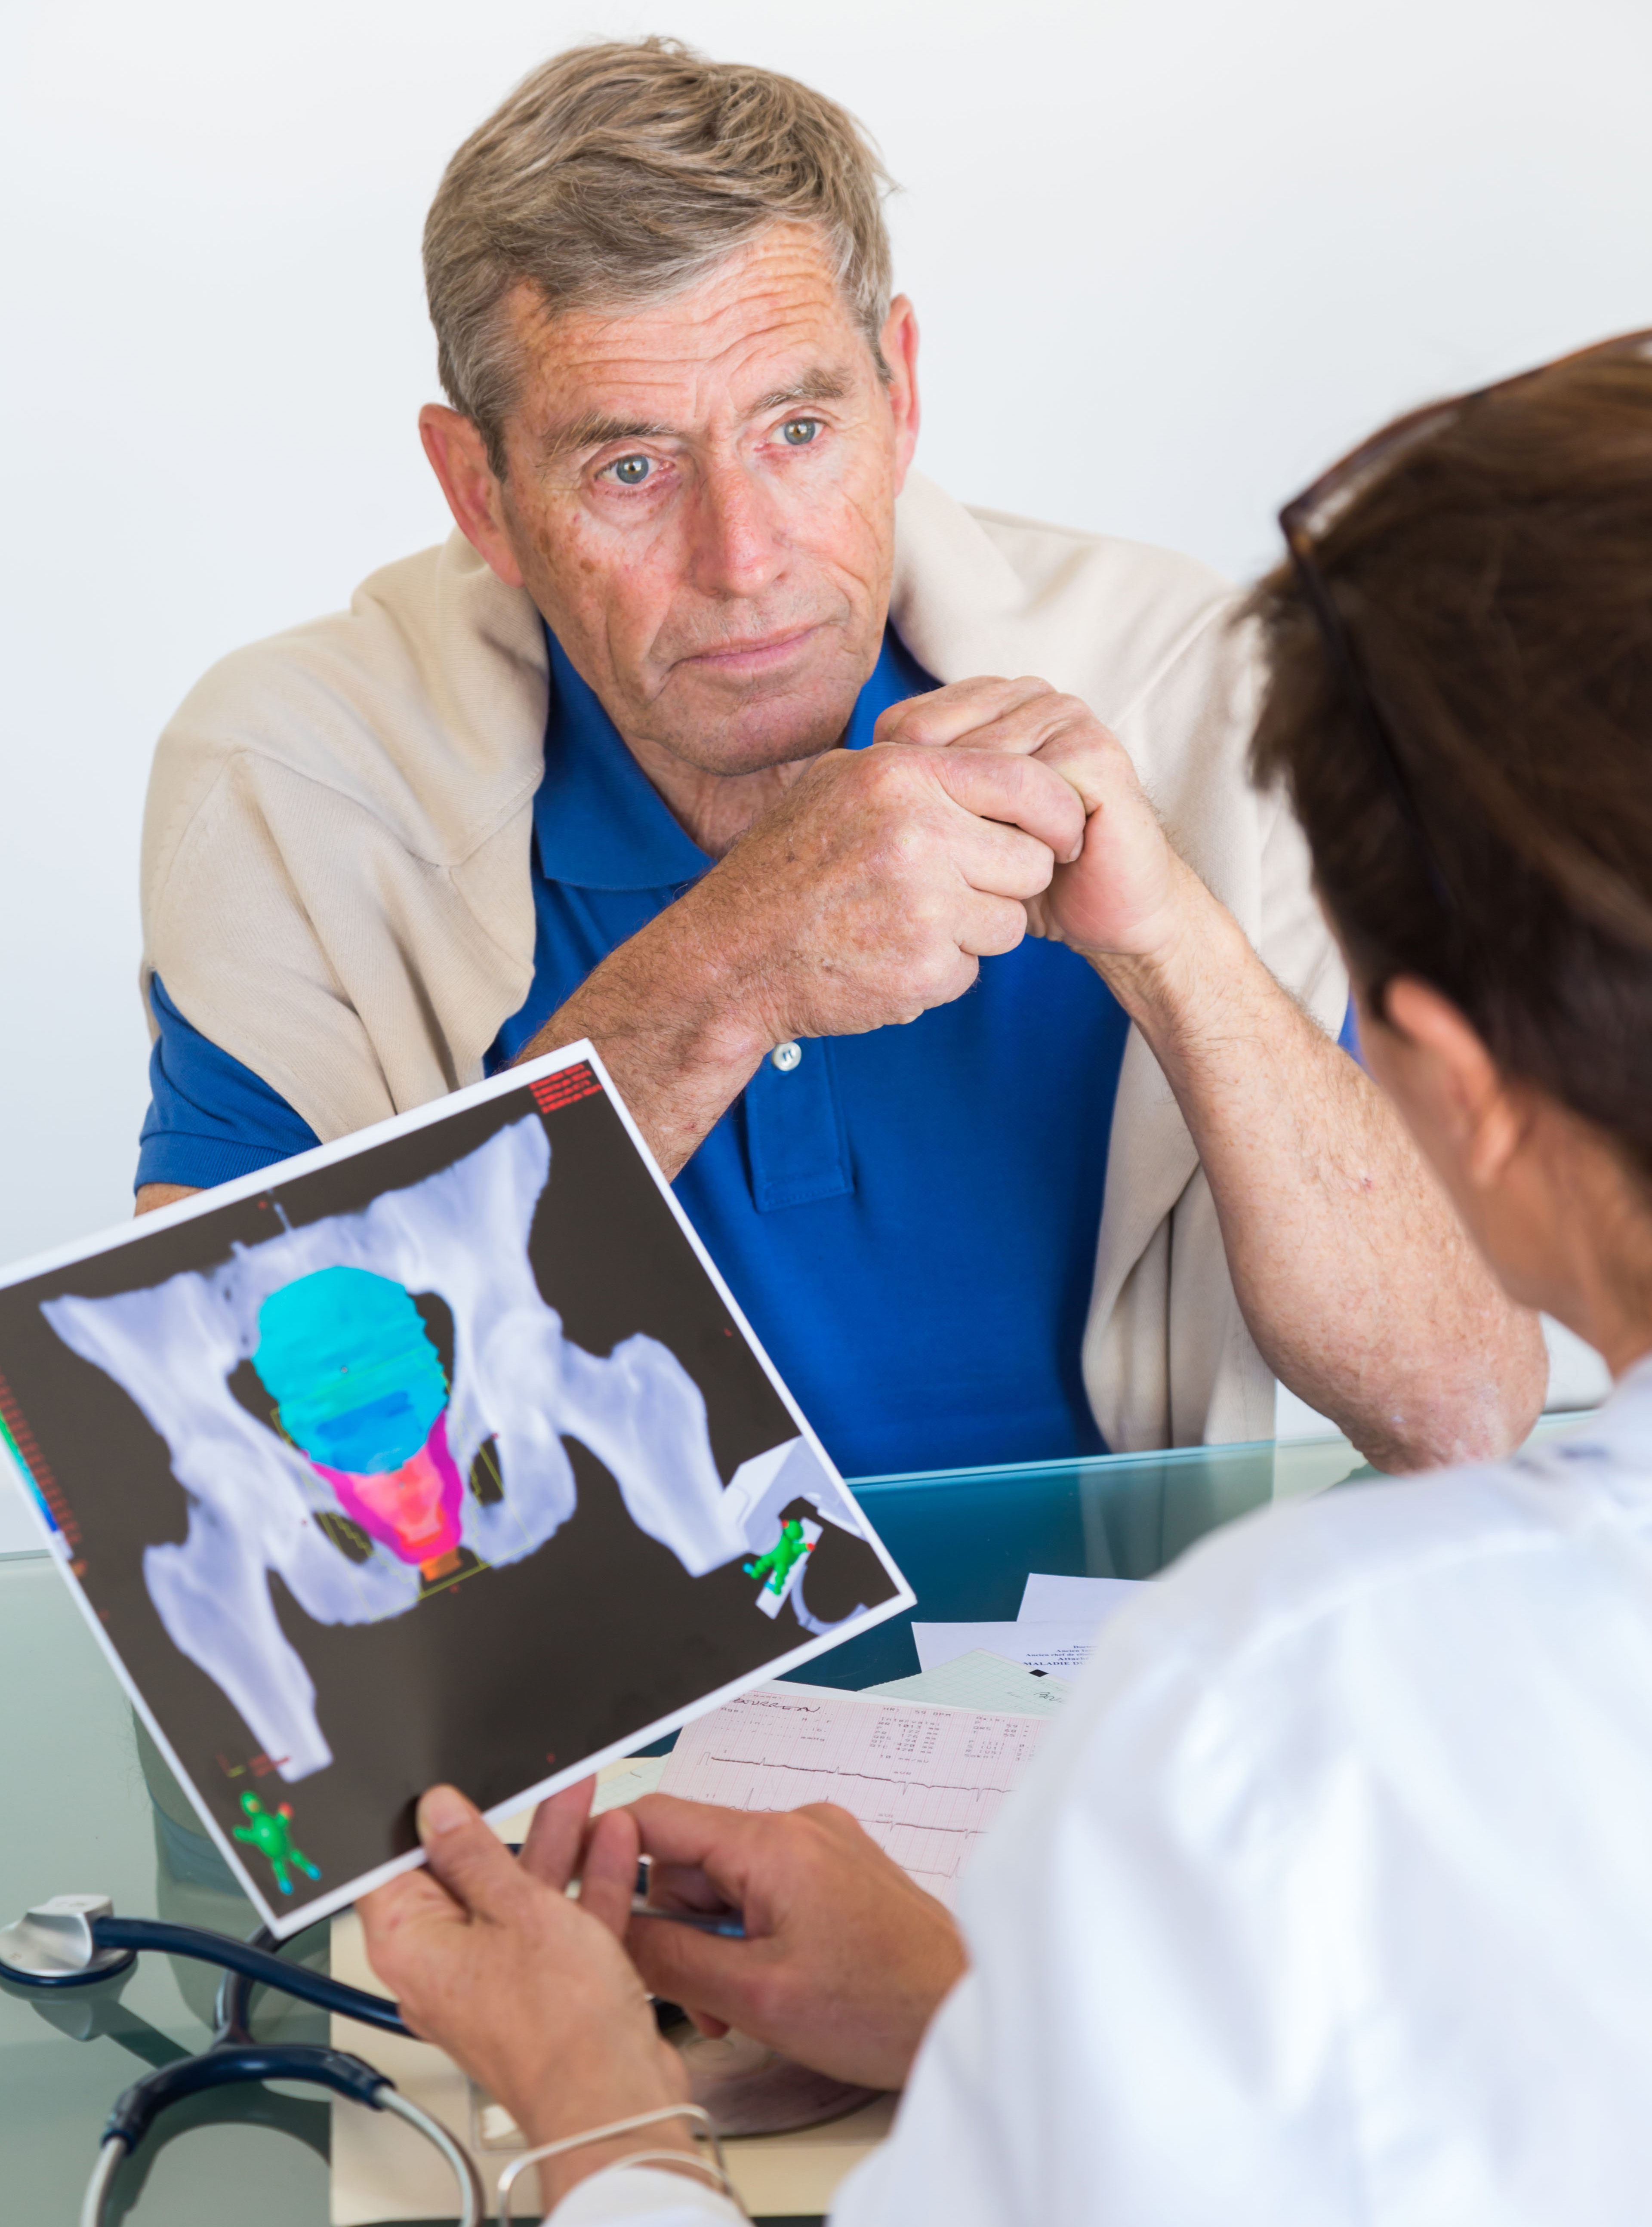 Prostate Cancer The Symptoms To Look Out For In Your Partner Woman 